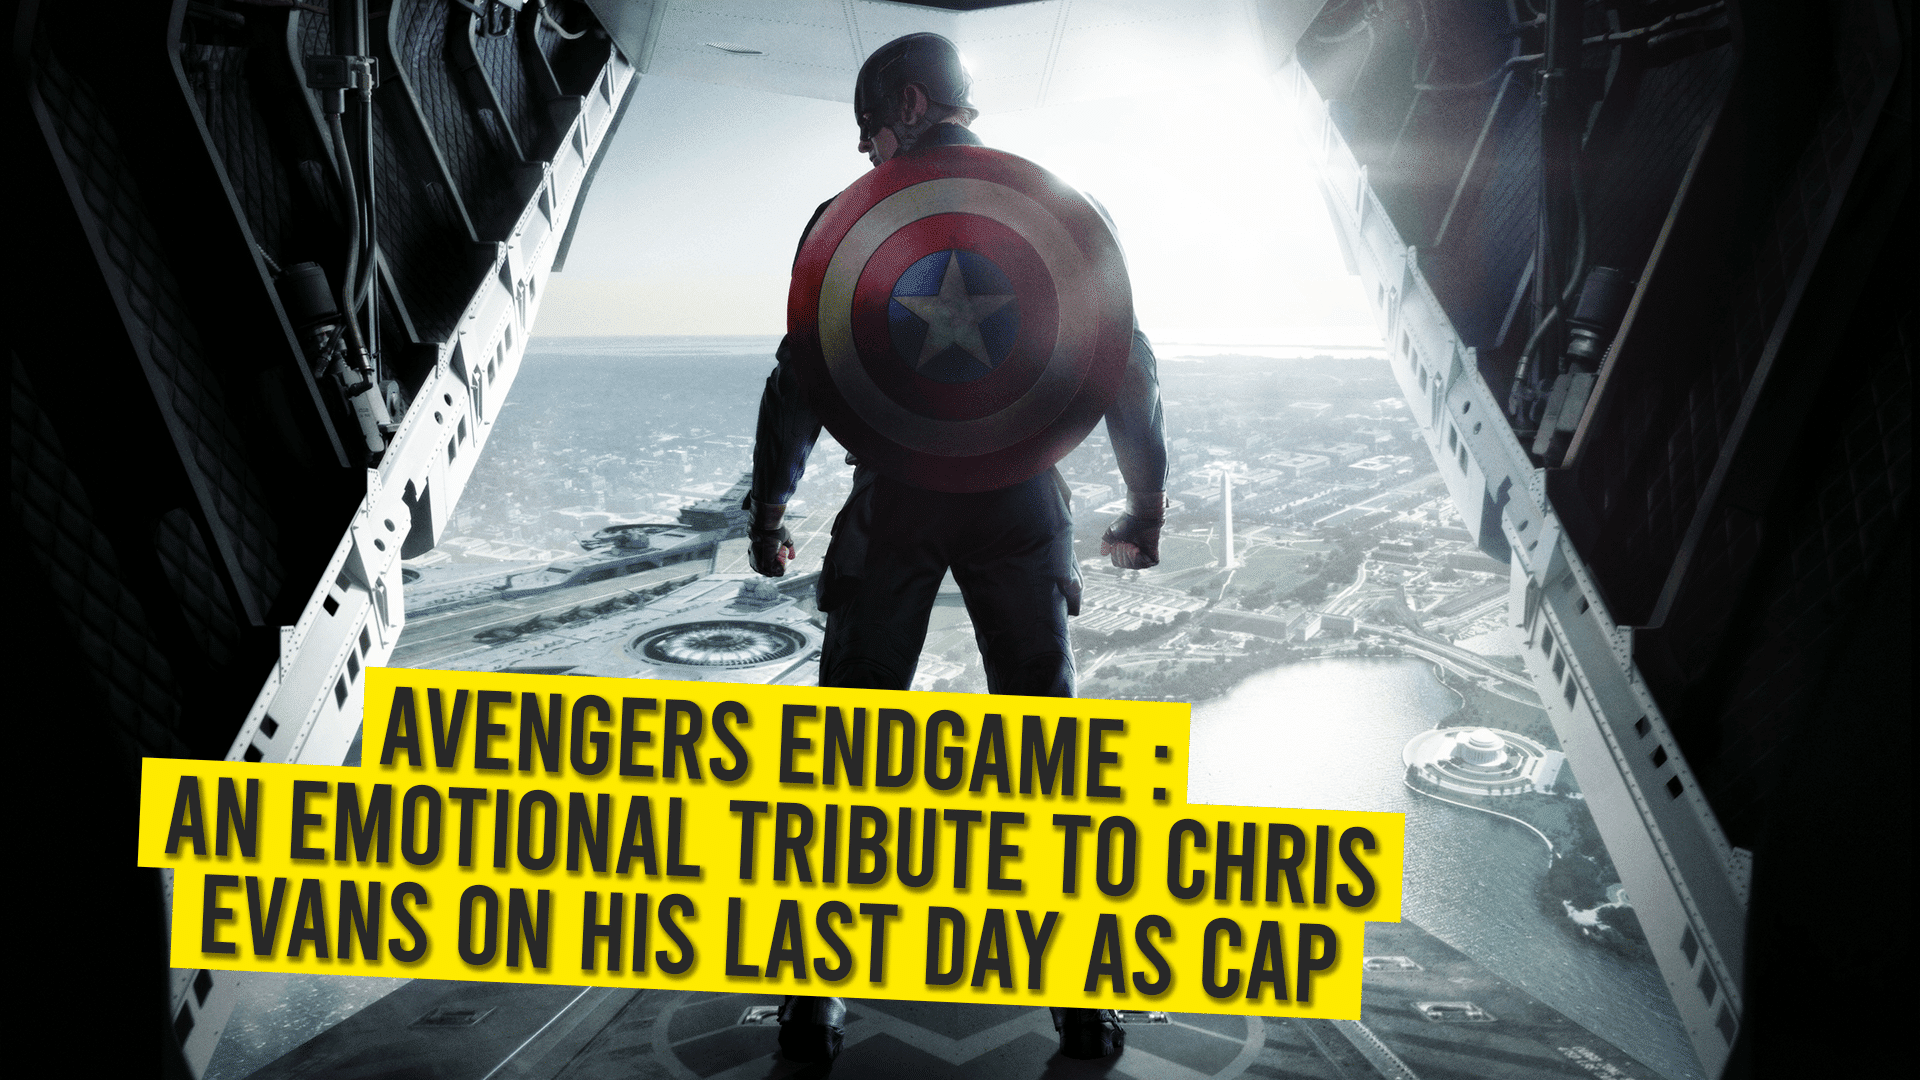 01 Avengers Endgame An Emotional Tribute to Chris Evans on his Last Day as Cap